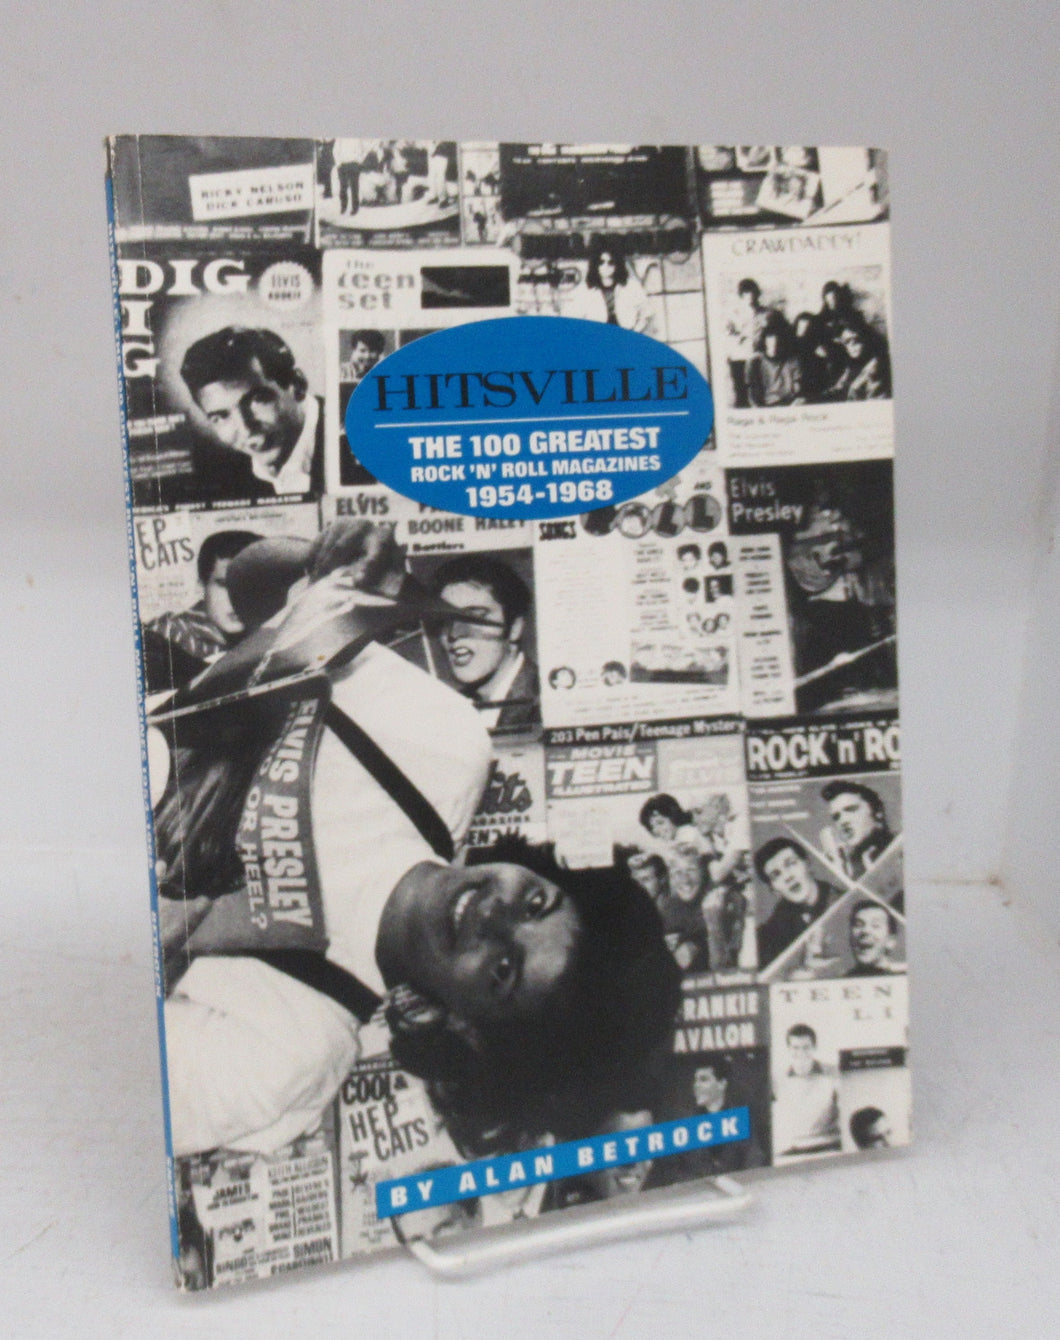 Hitsville: The 100 Greatest Rock 'n' Roll Magazines 1954-1968